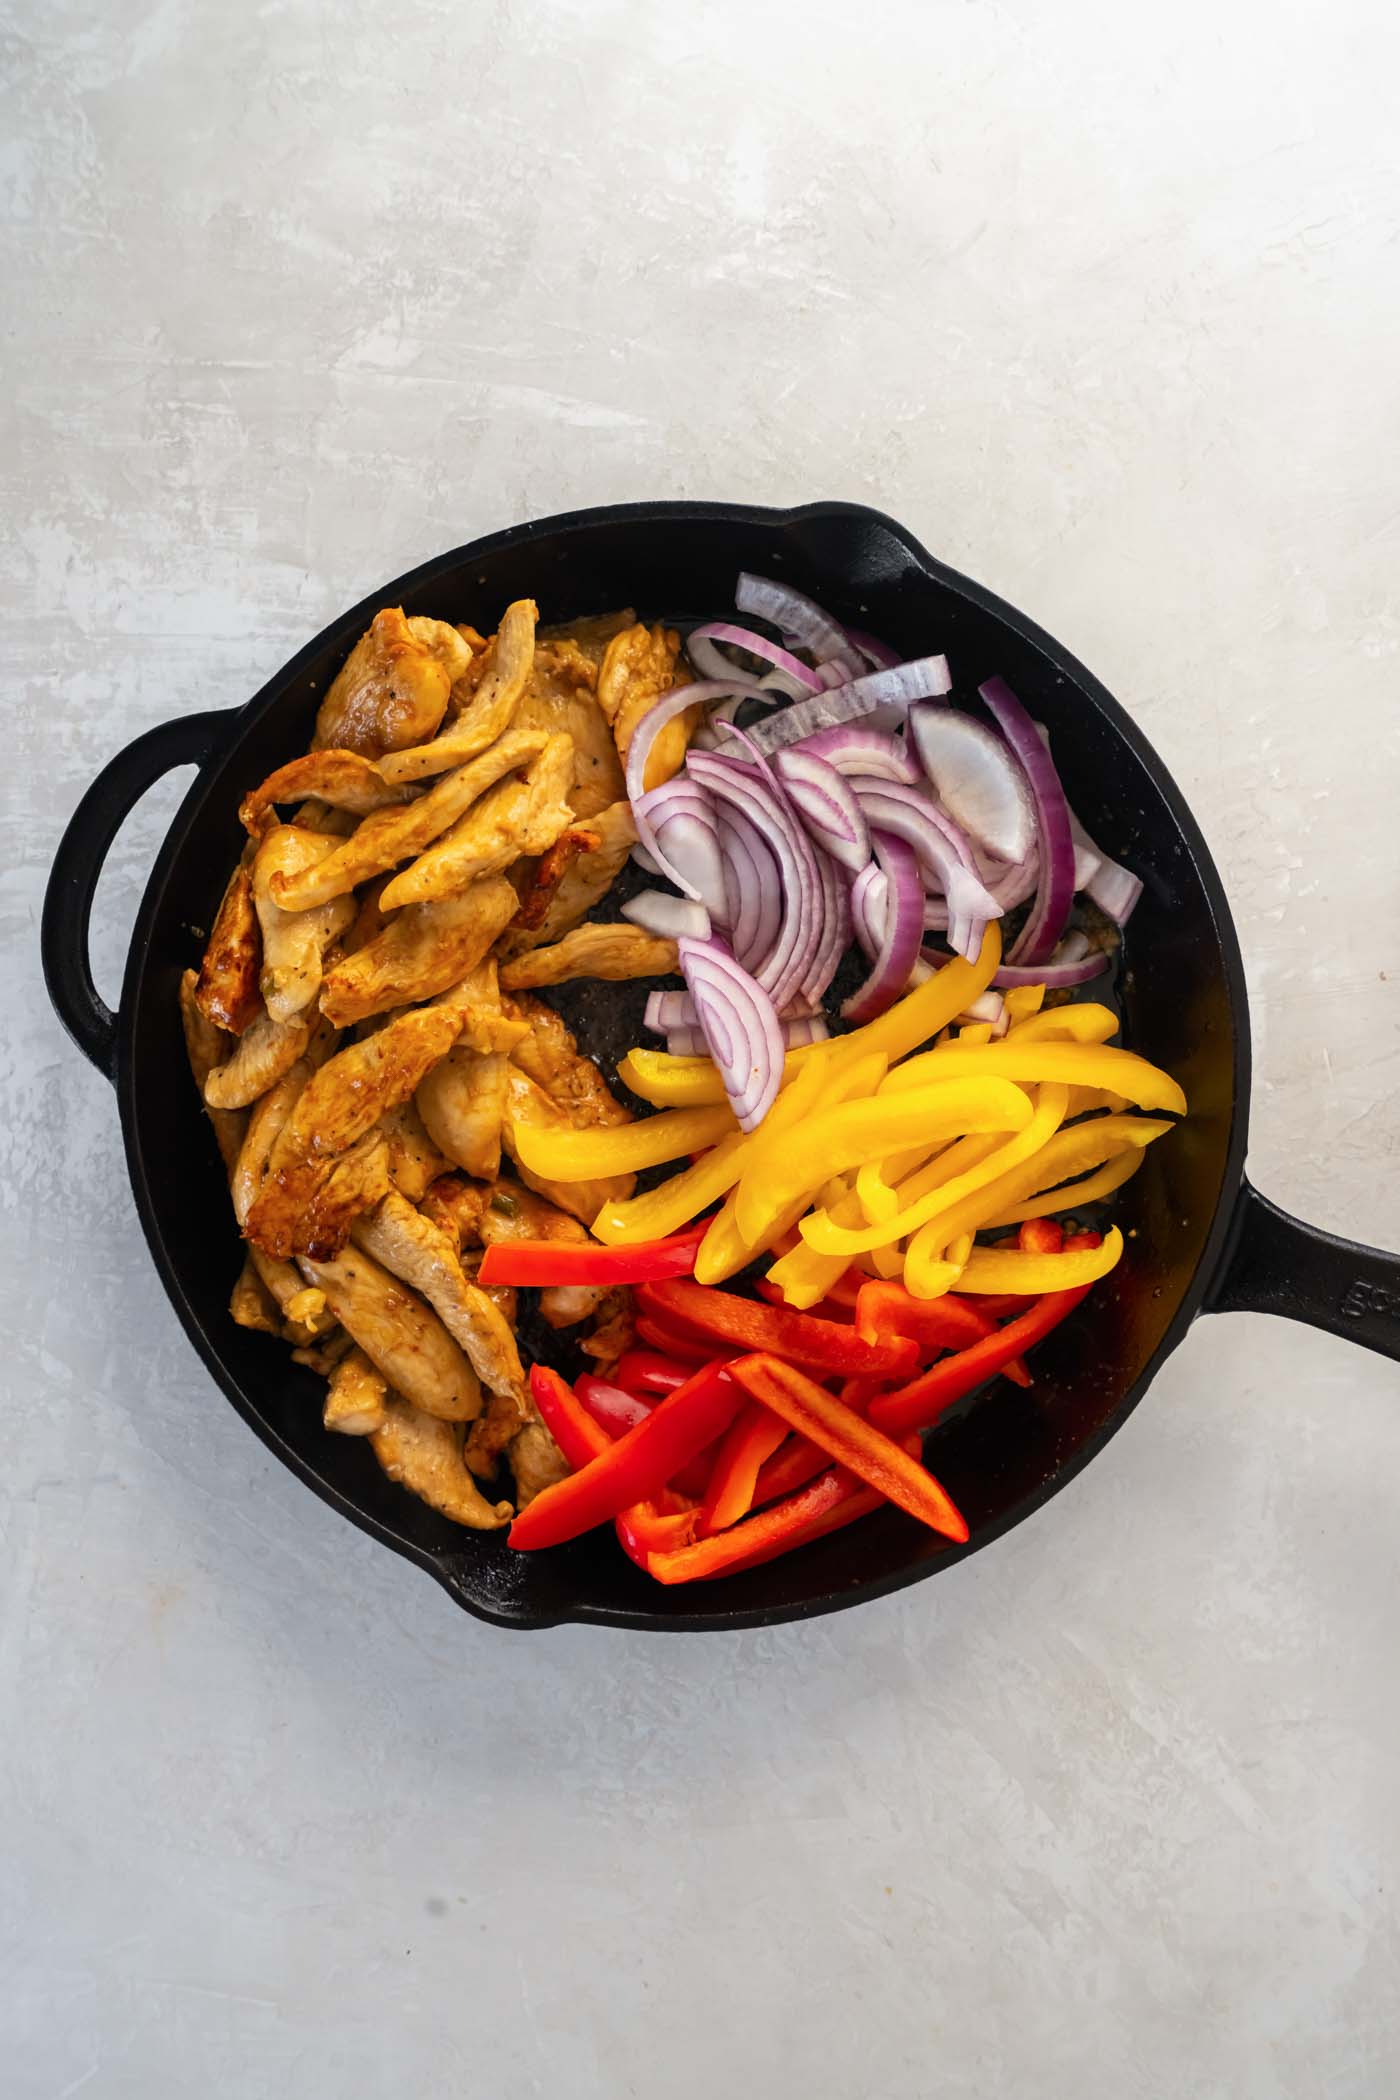 Cooking chicken strips, sliced red onion and sliced bell peppers in a cast iron skillet.